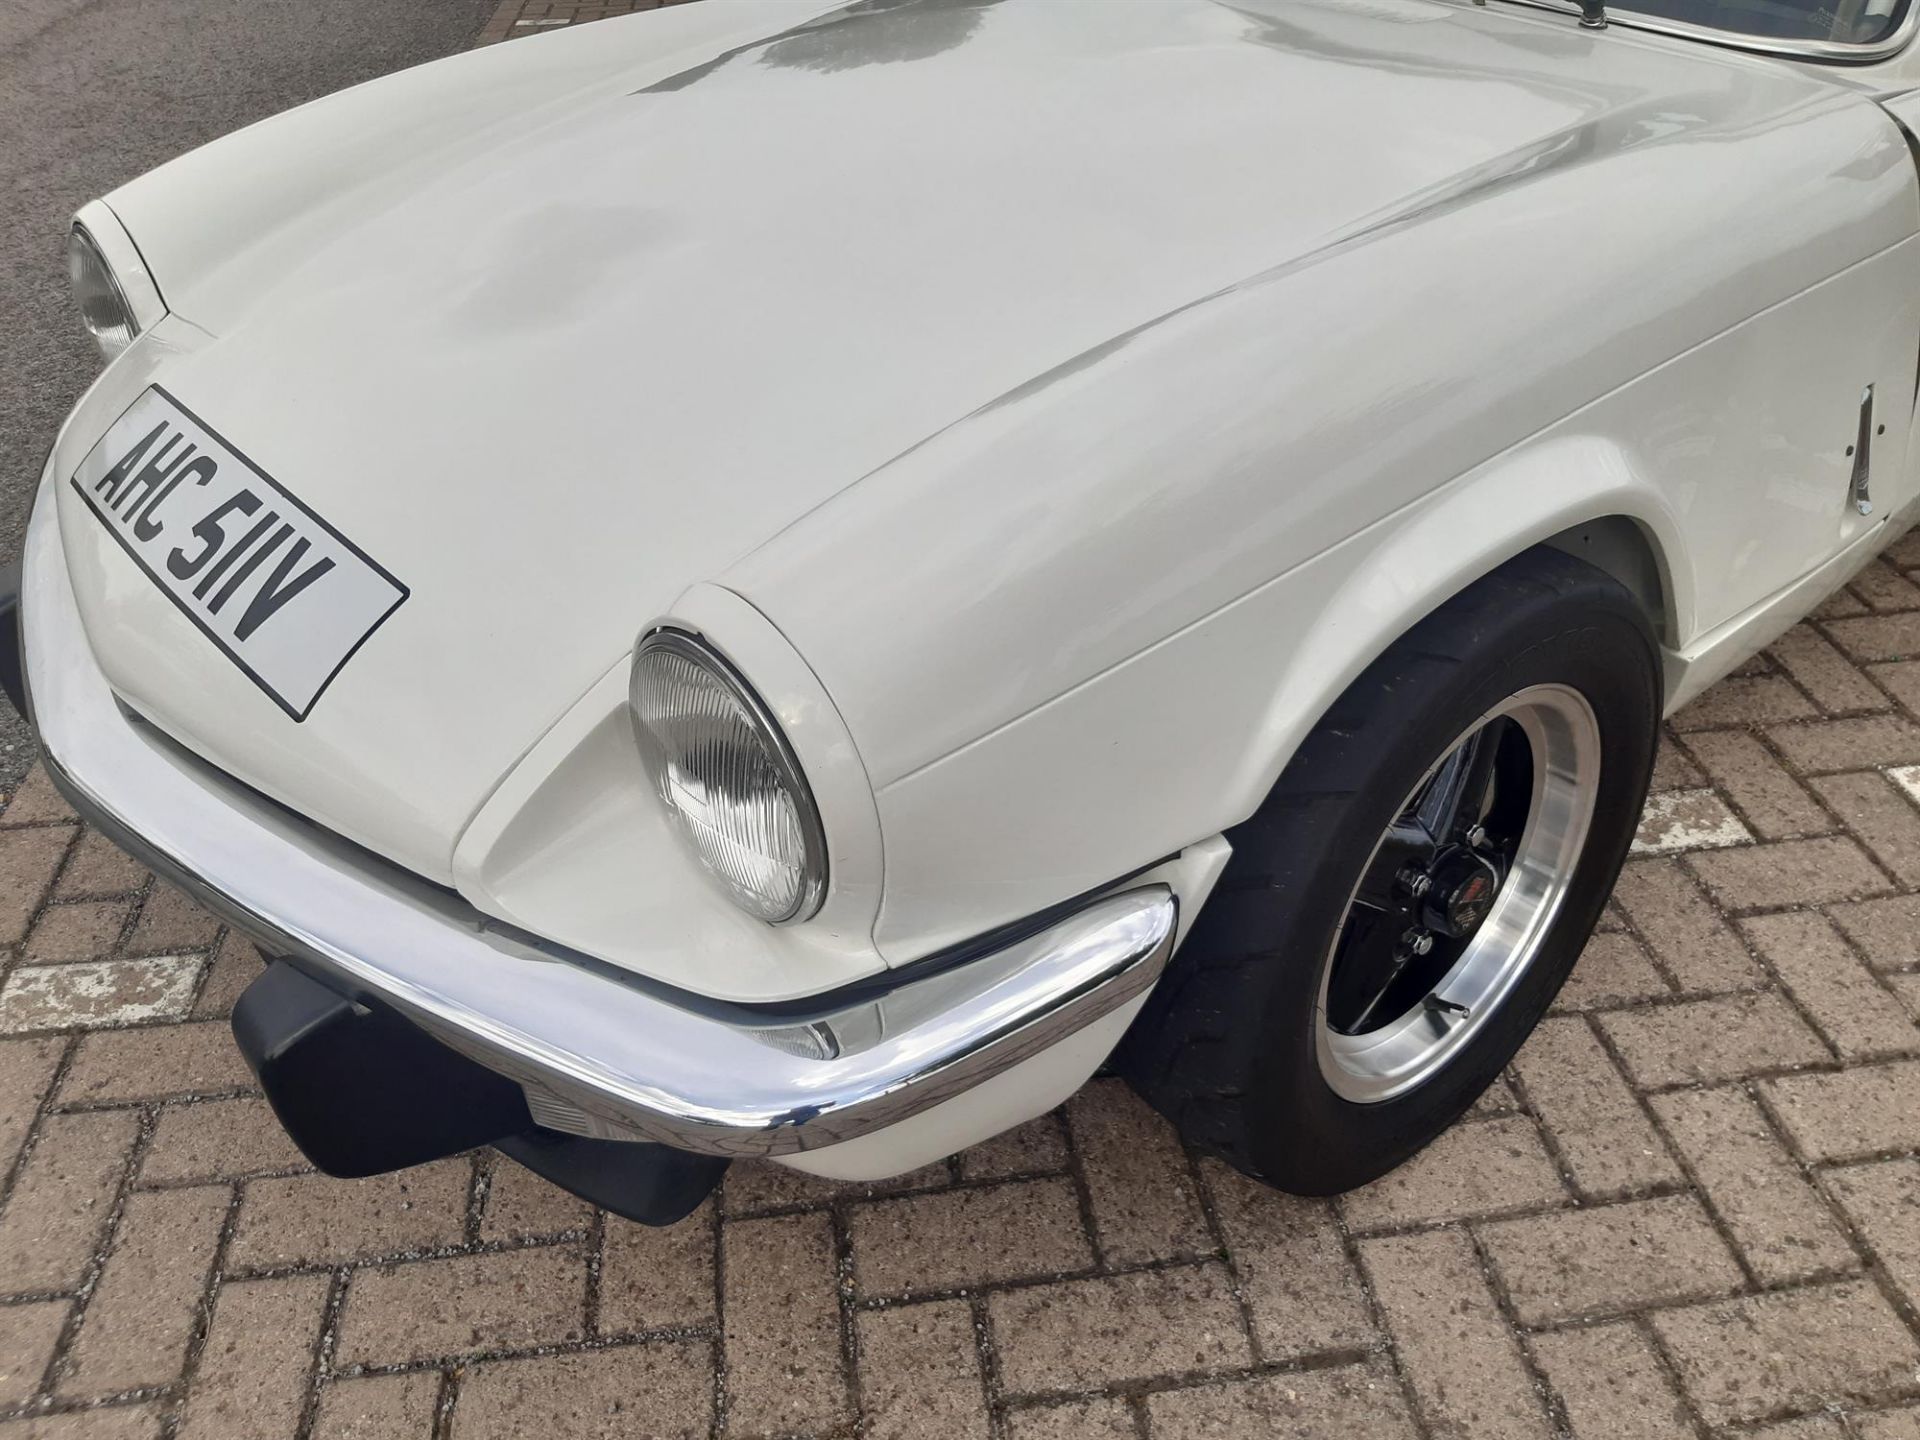 1980 Triumph Spitfire 1500 Fast Road Comvertible with Hardtop - Image 8 of 10